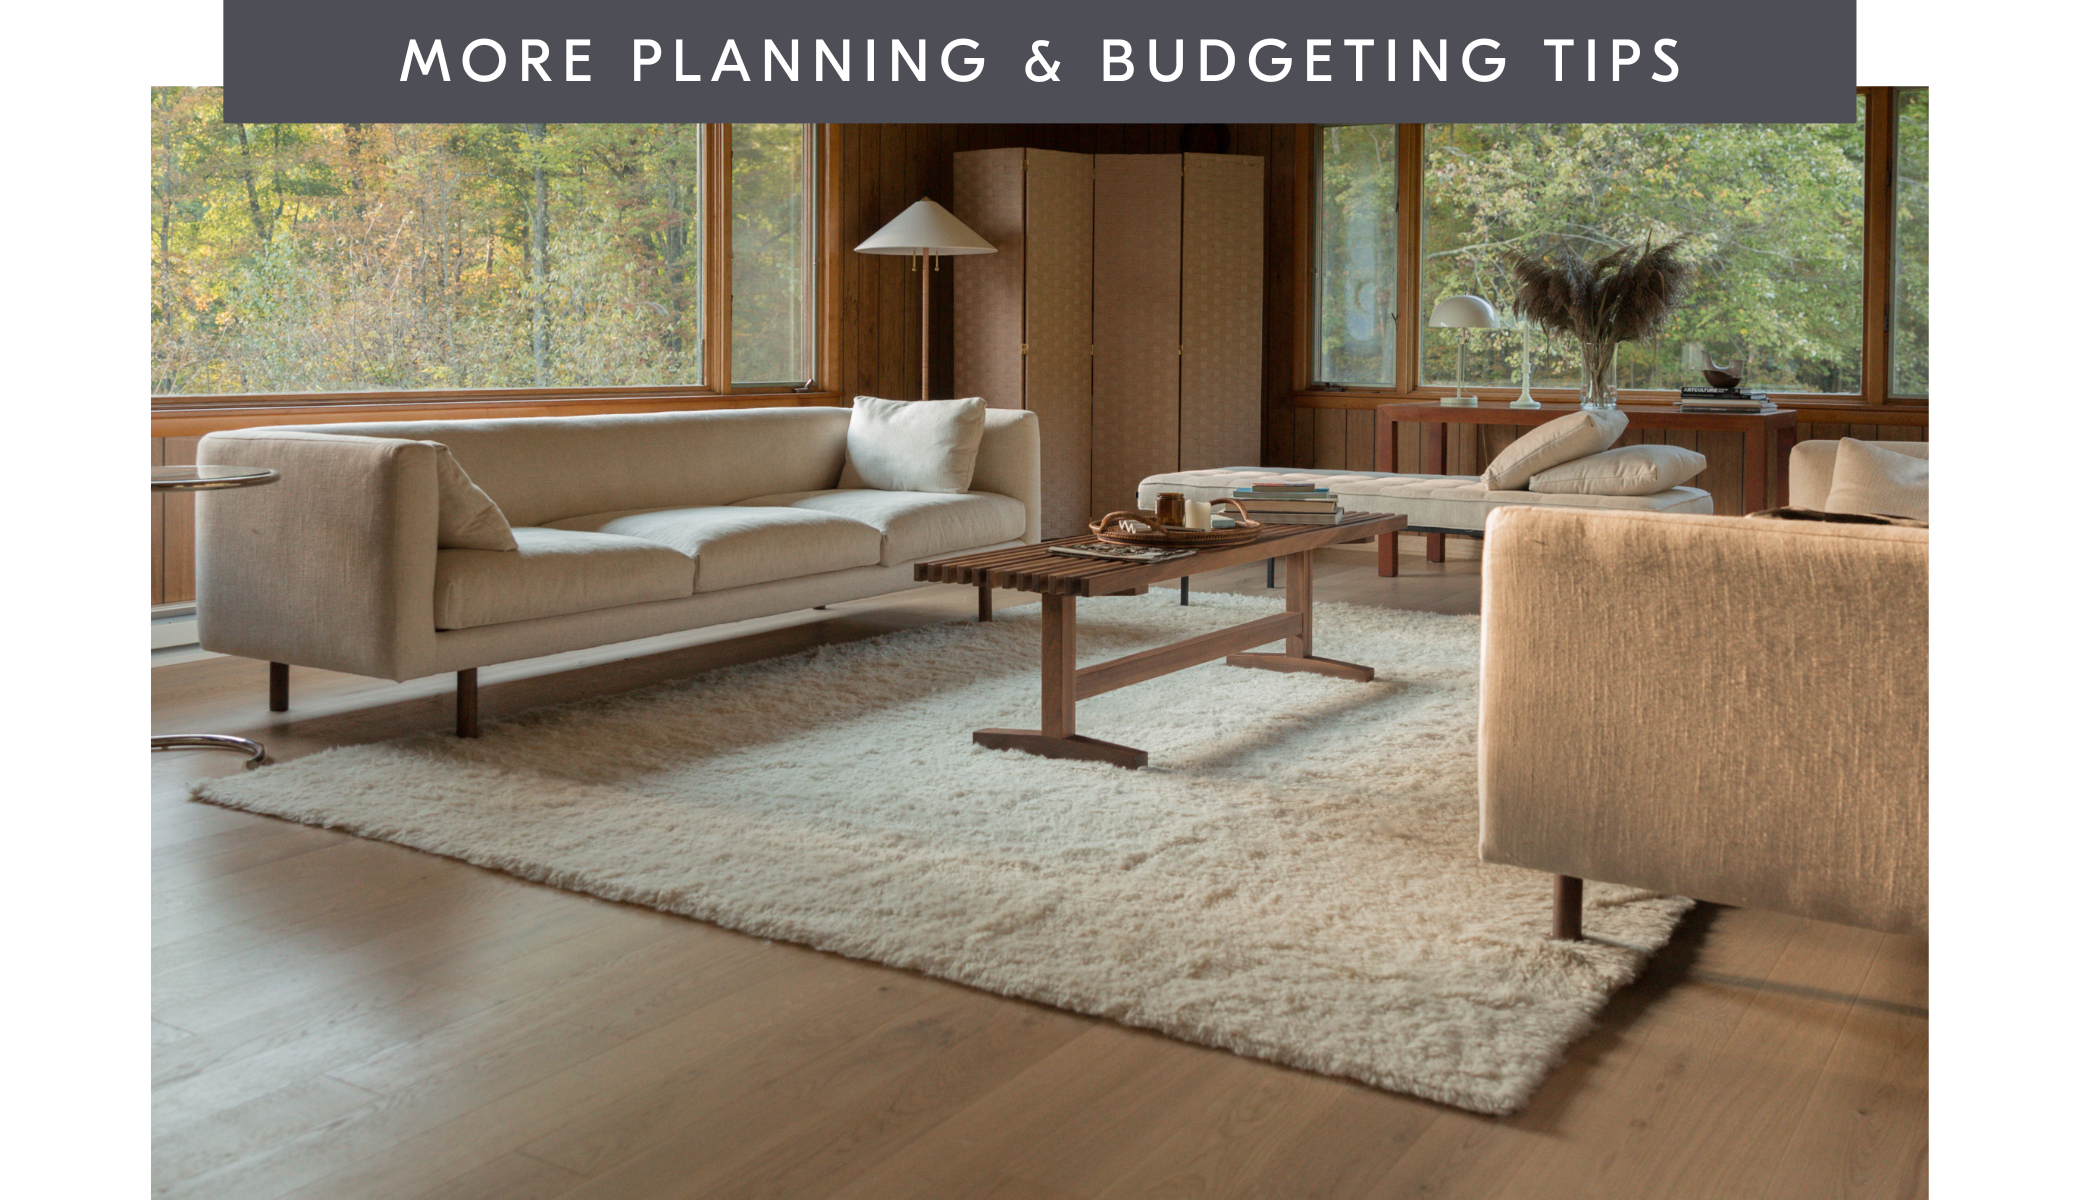 Read more renovation planning and budgeting tips